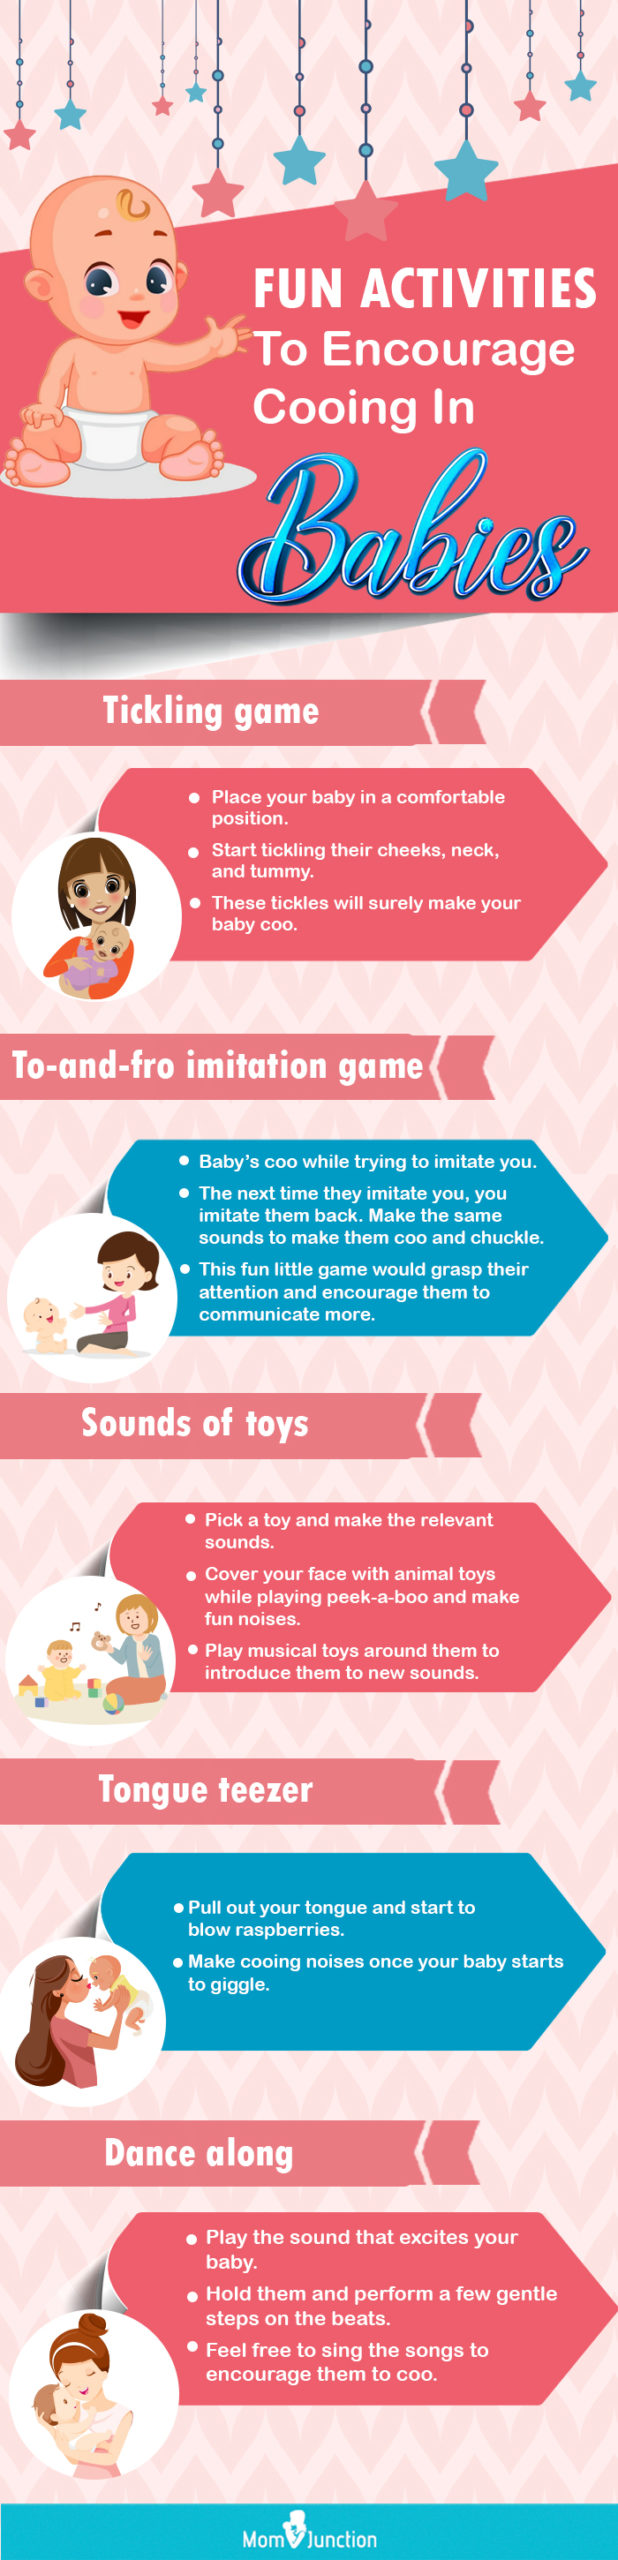 promote cooing in babies (infographic)